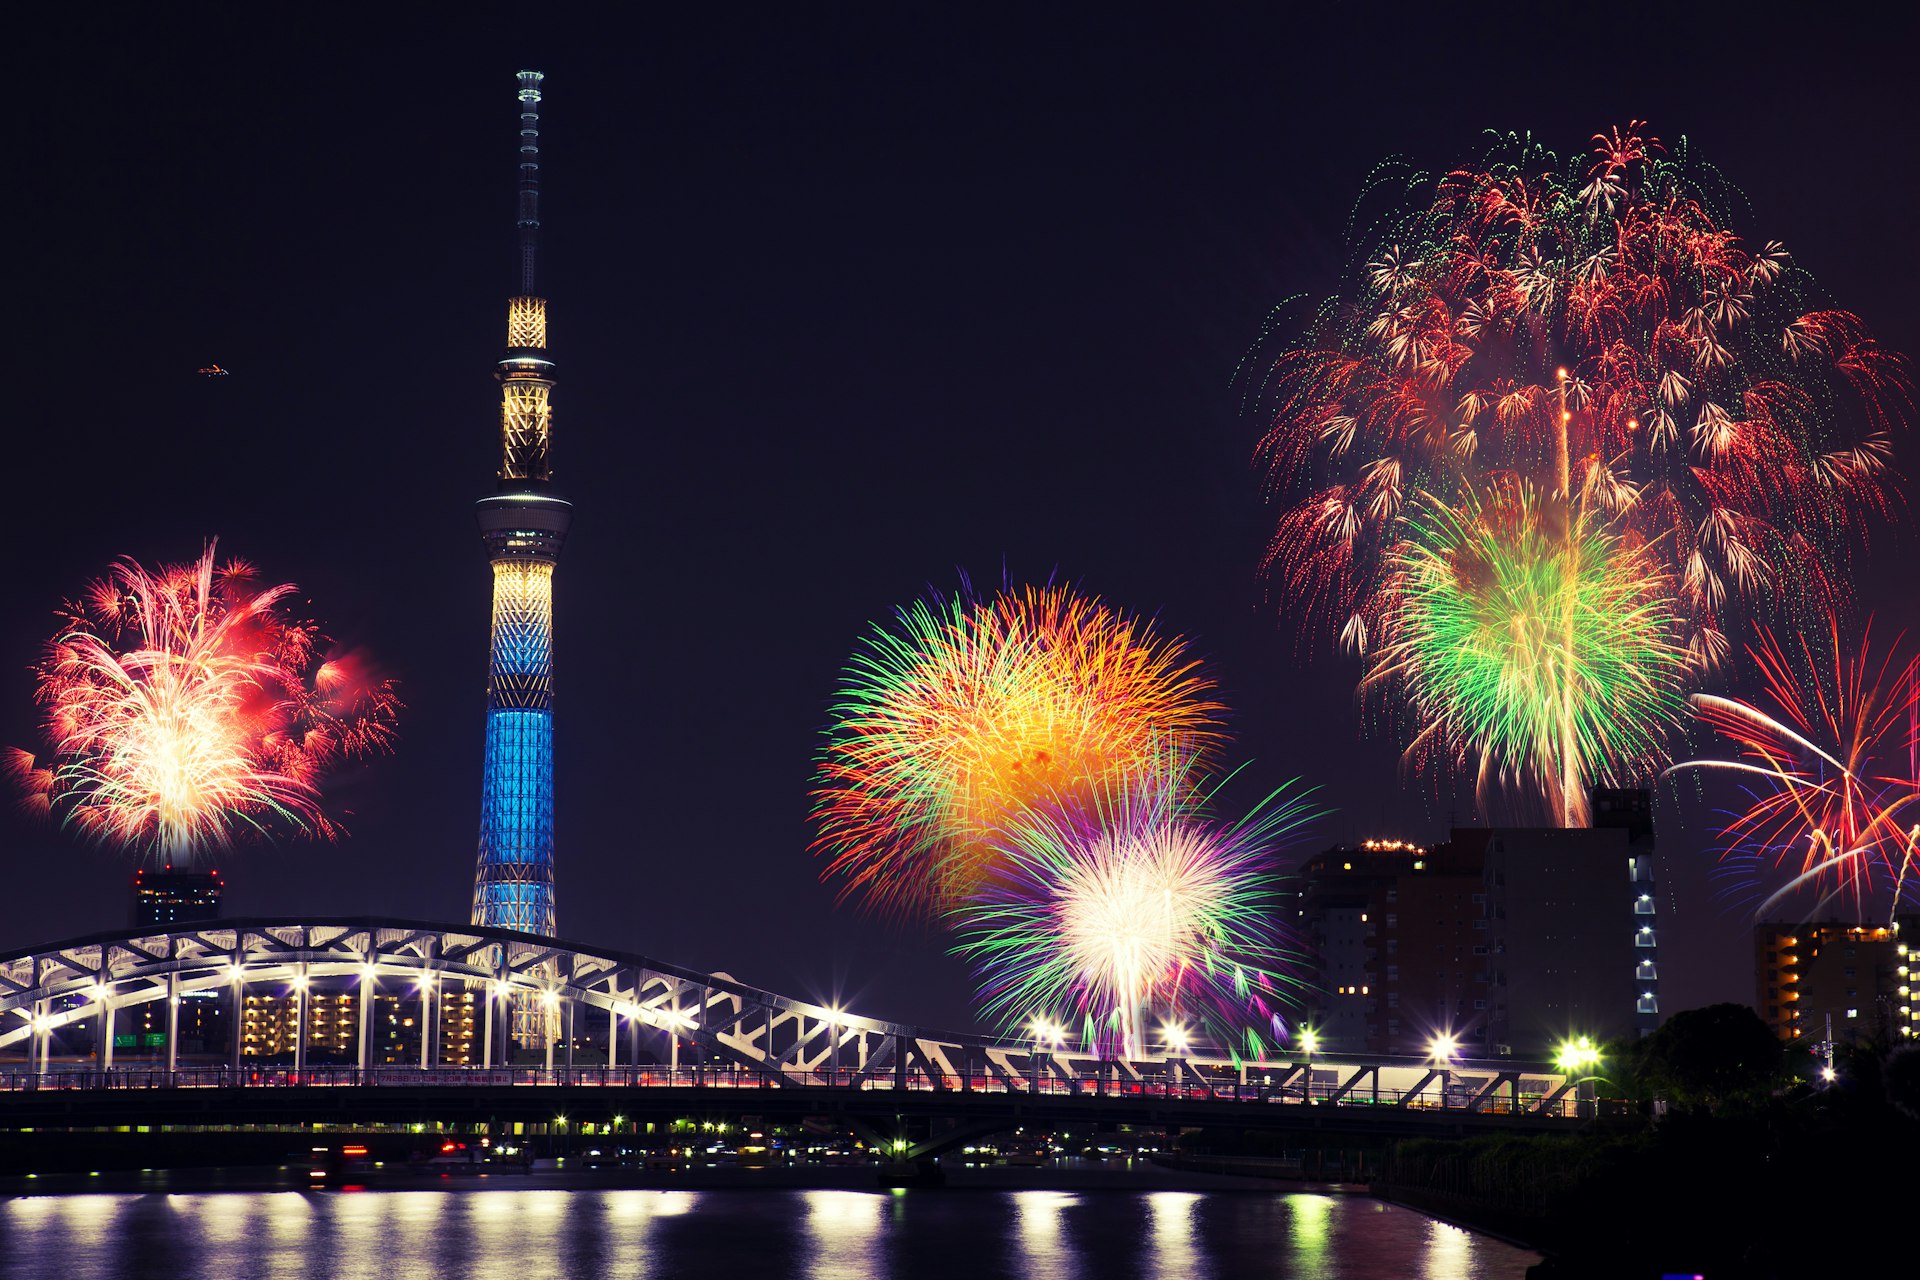 Summer fireworks over the Sumida river at night in Tokyo Japan